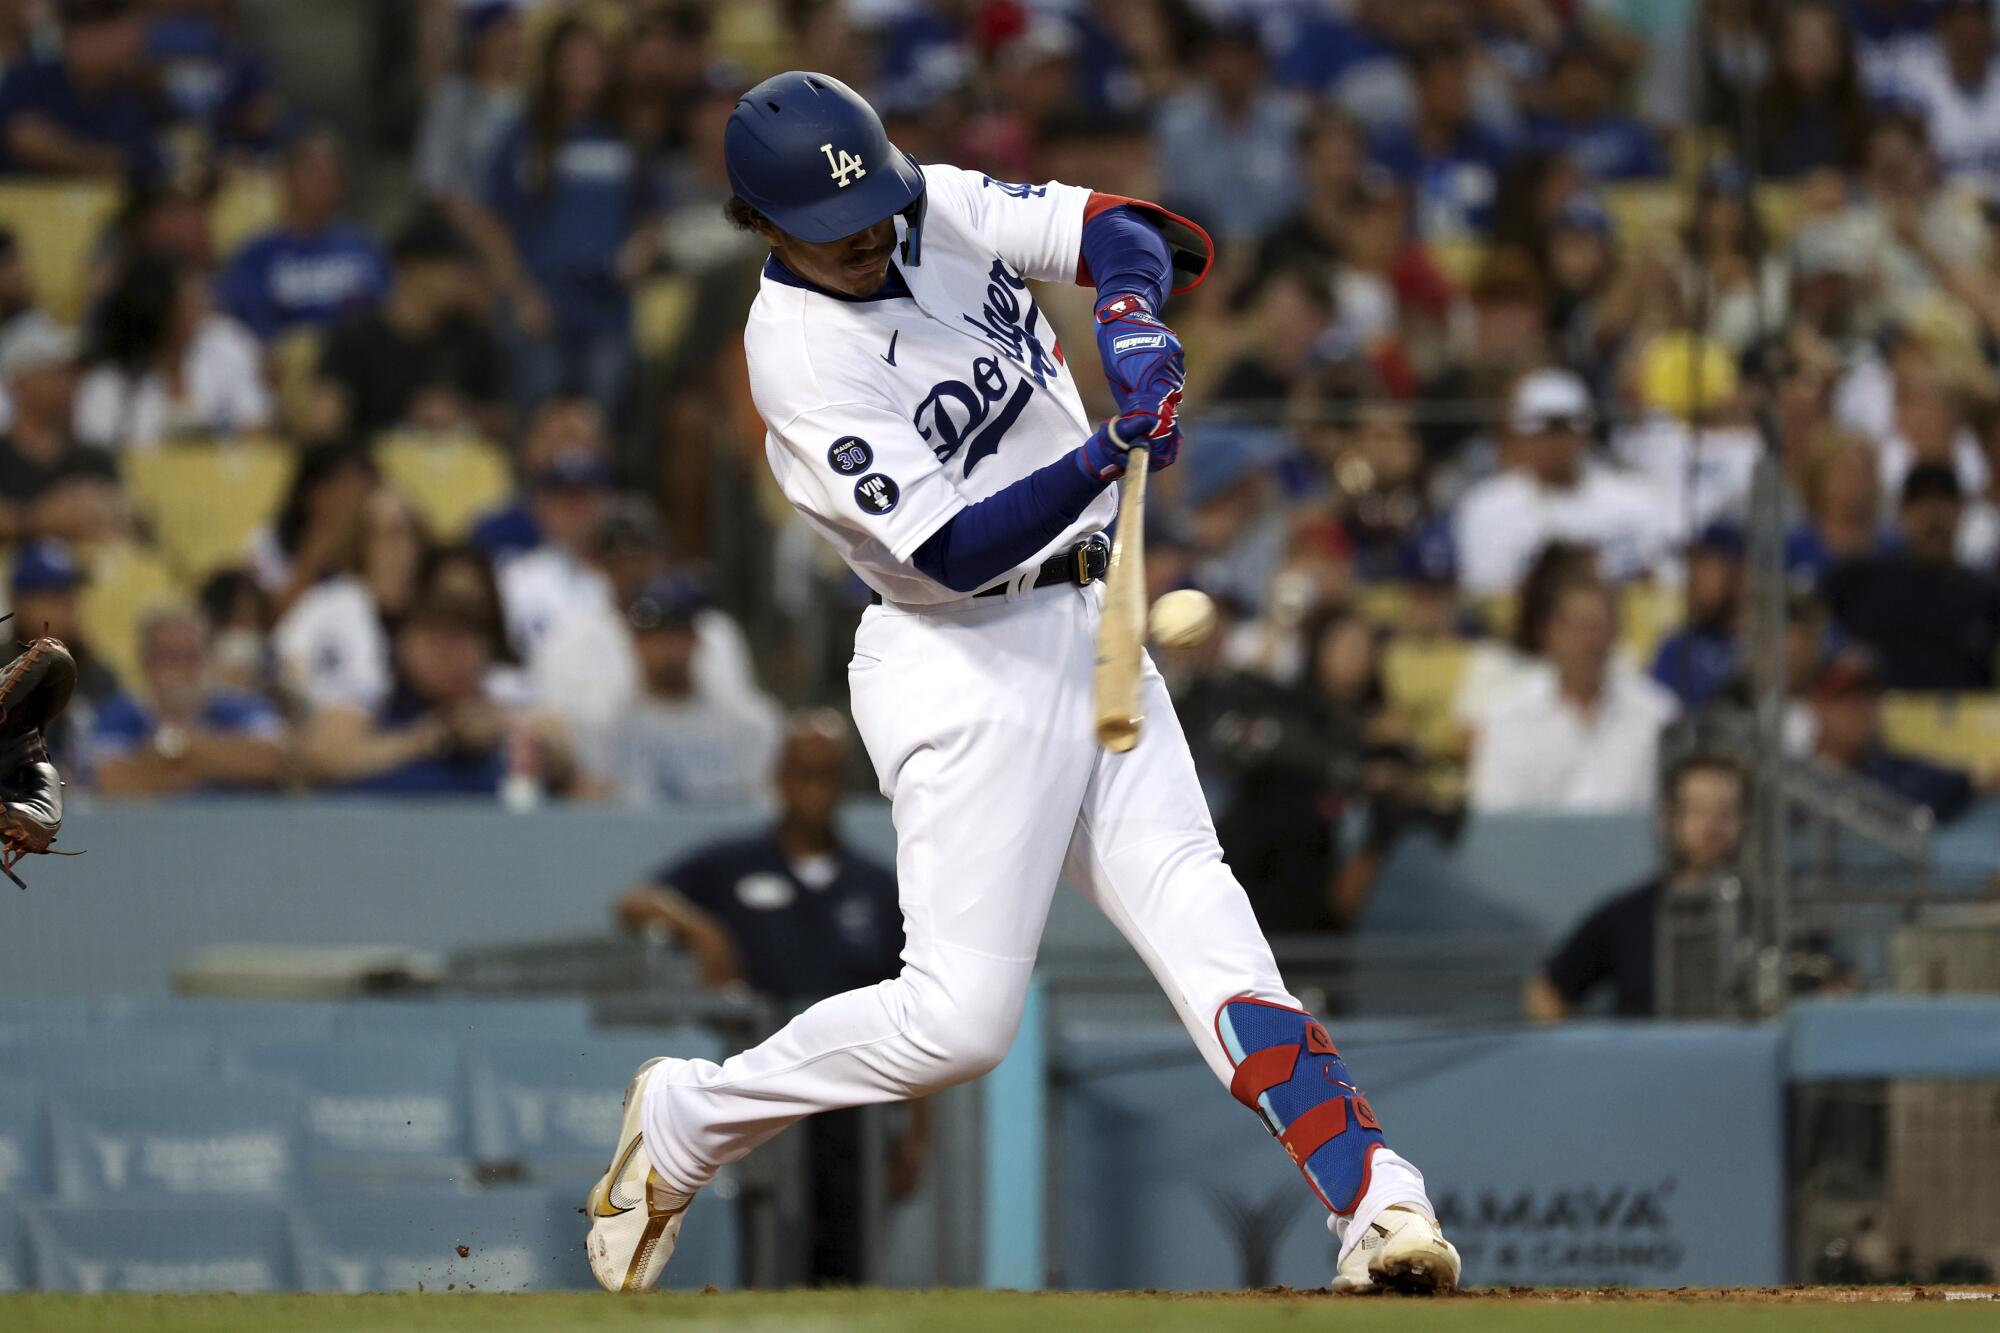 Dodgers first baseman Miguel Vargas hits his first major league home run during the second inning.